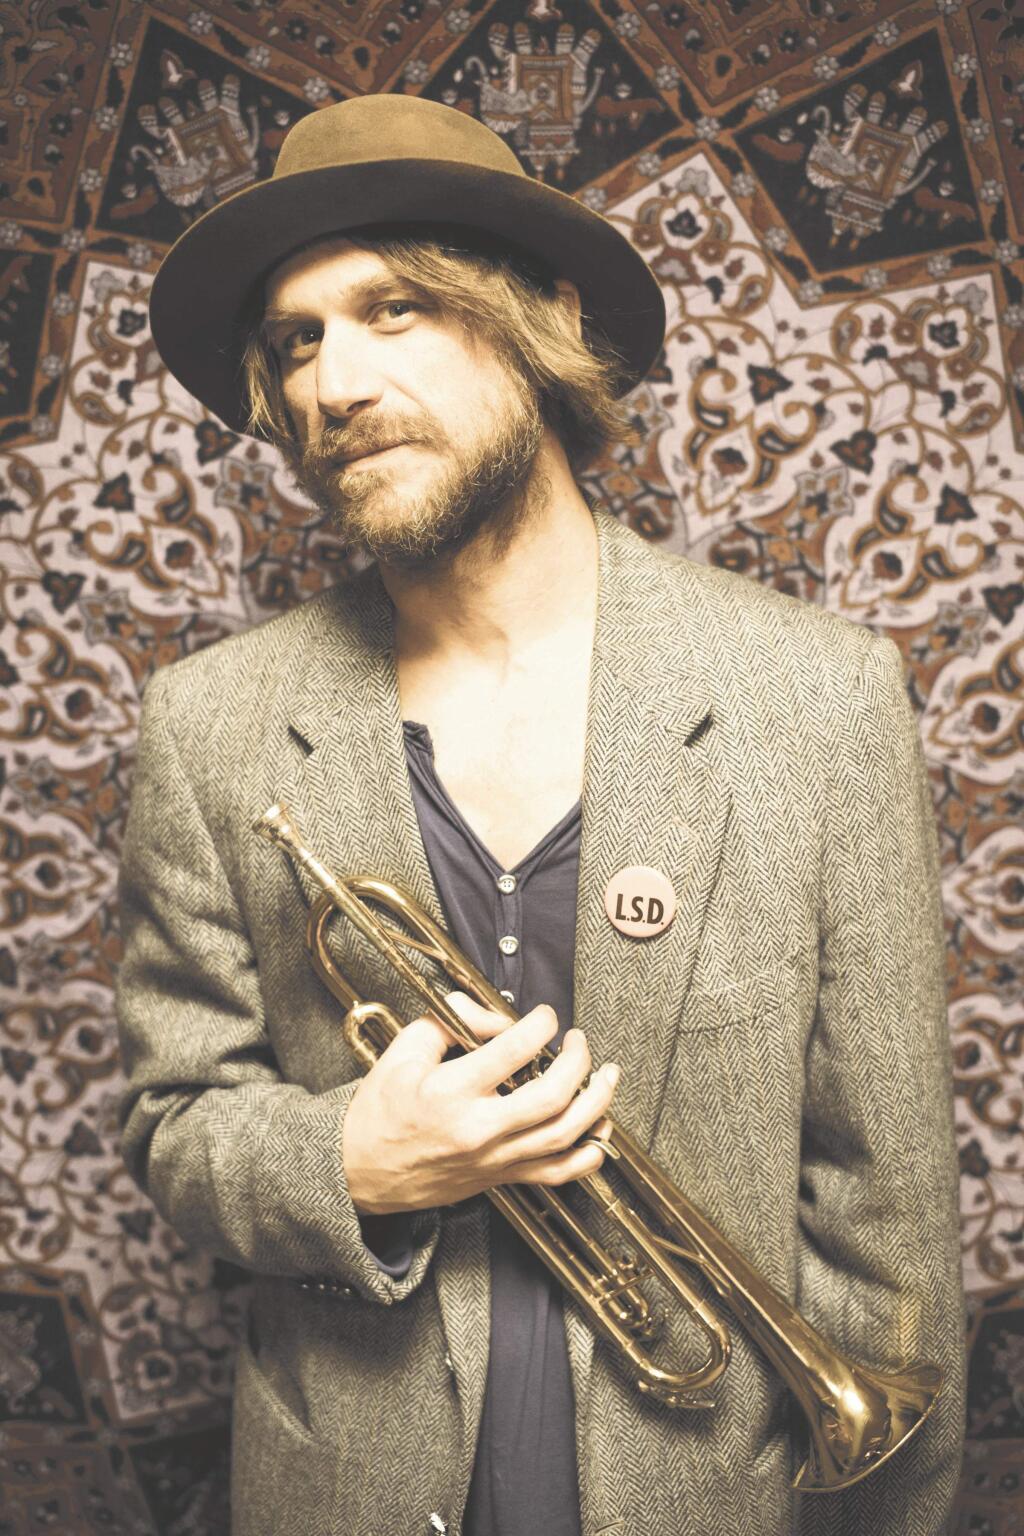 Singer-songwriter Todd Snider has a musical style that combines Americana, alt-country, and folk. Snider doesn't play the trumpet, but as he explained in an interview, 'a friend of mine took a photo of me playing the trumpet. I don't play the trumpet, but I look cool. You wouldn't know that I wasn't kicking its ass. It's making an awful squawking noise in reality, but it looks like I'm laying it down.' HO